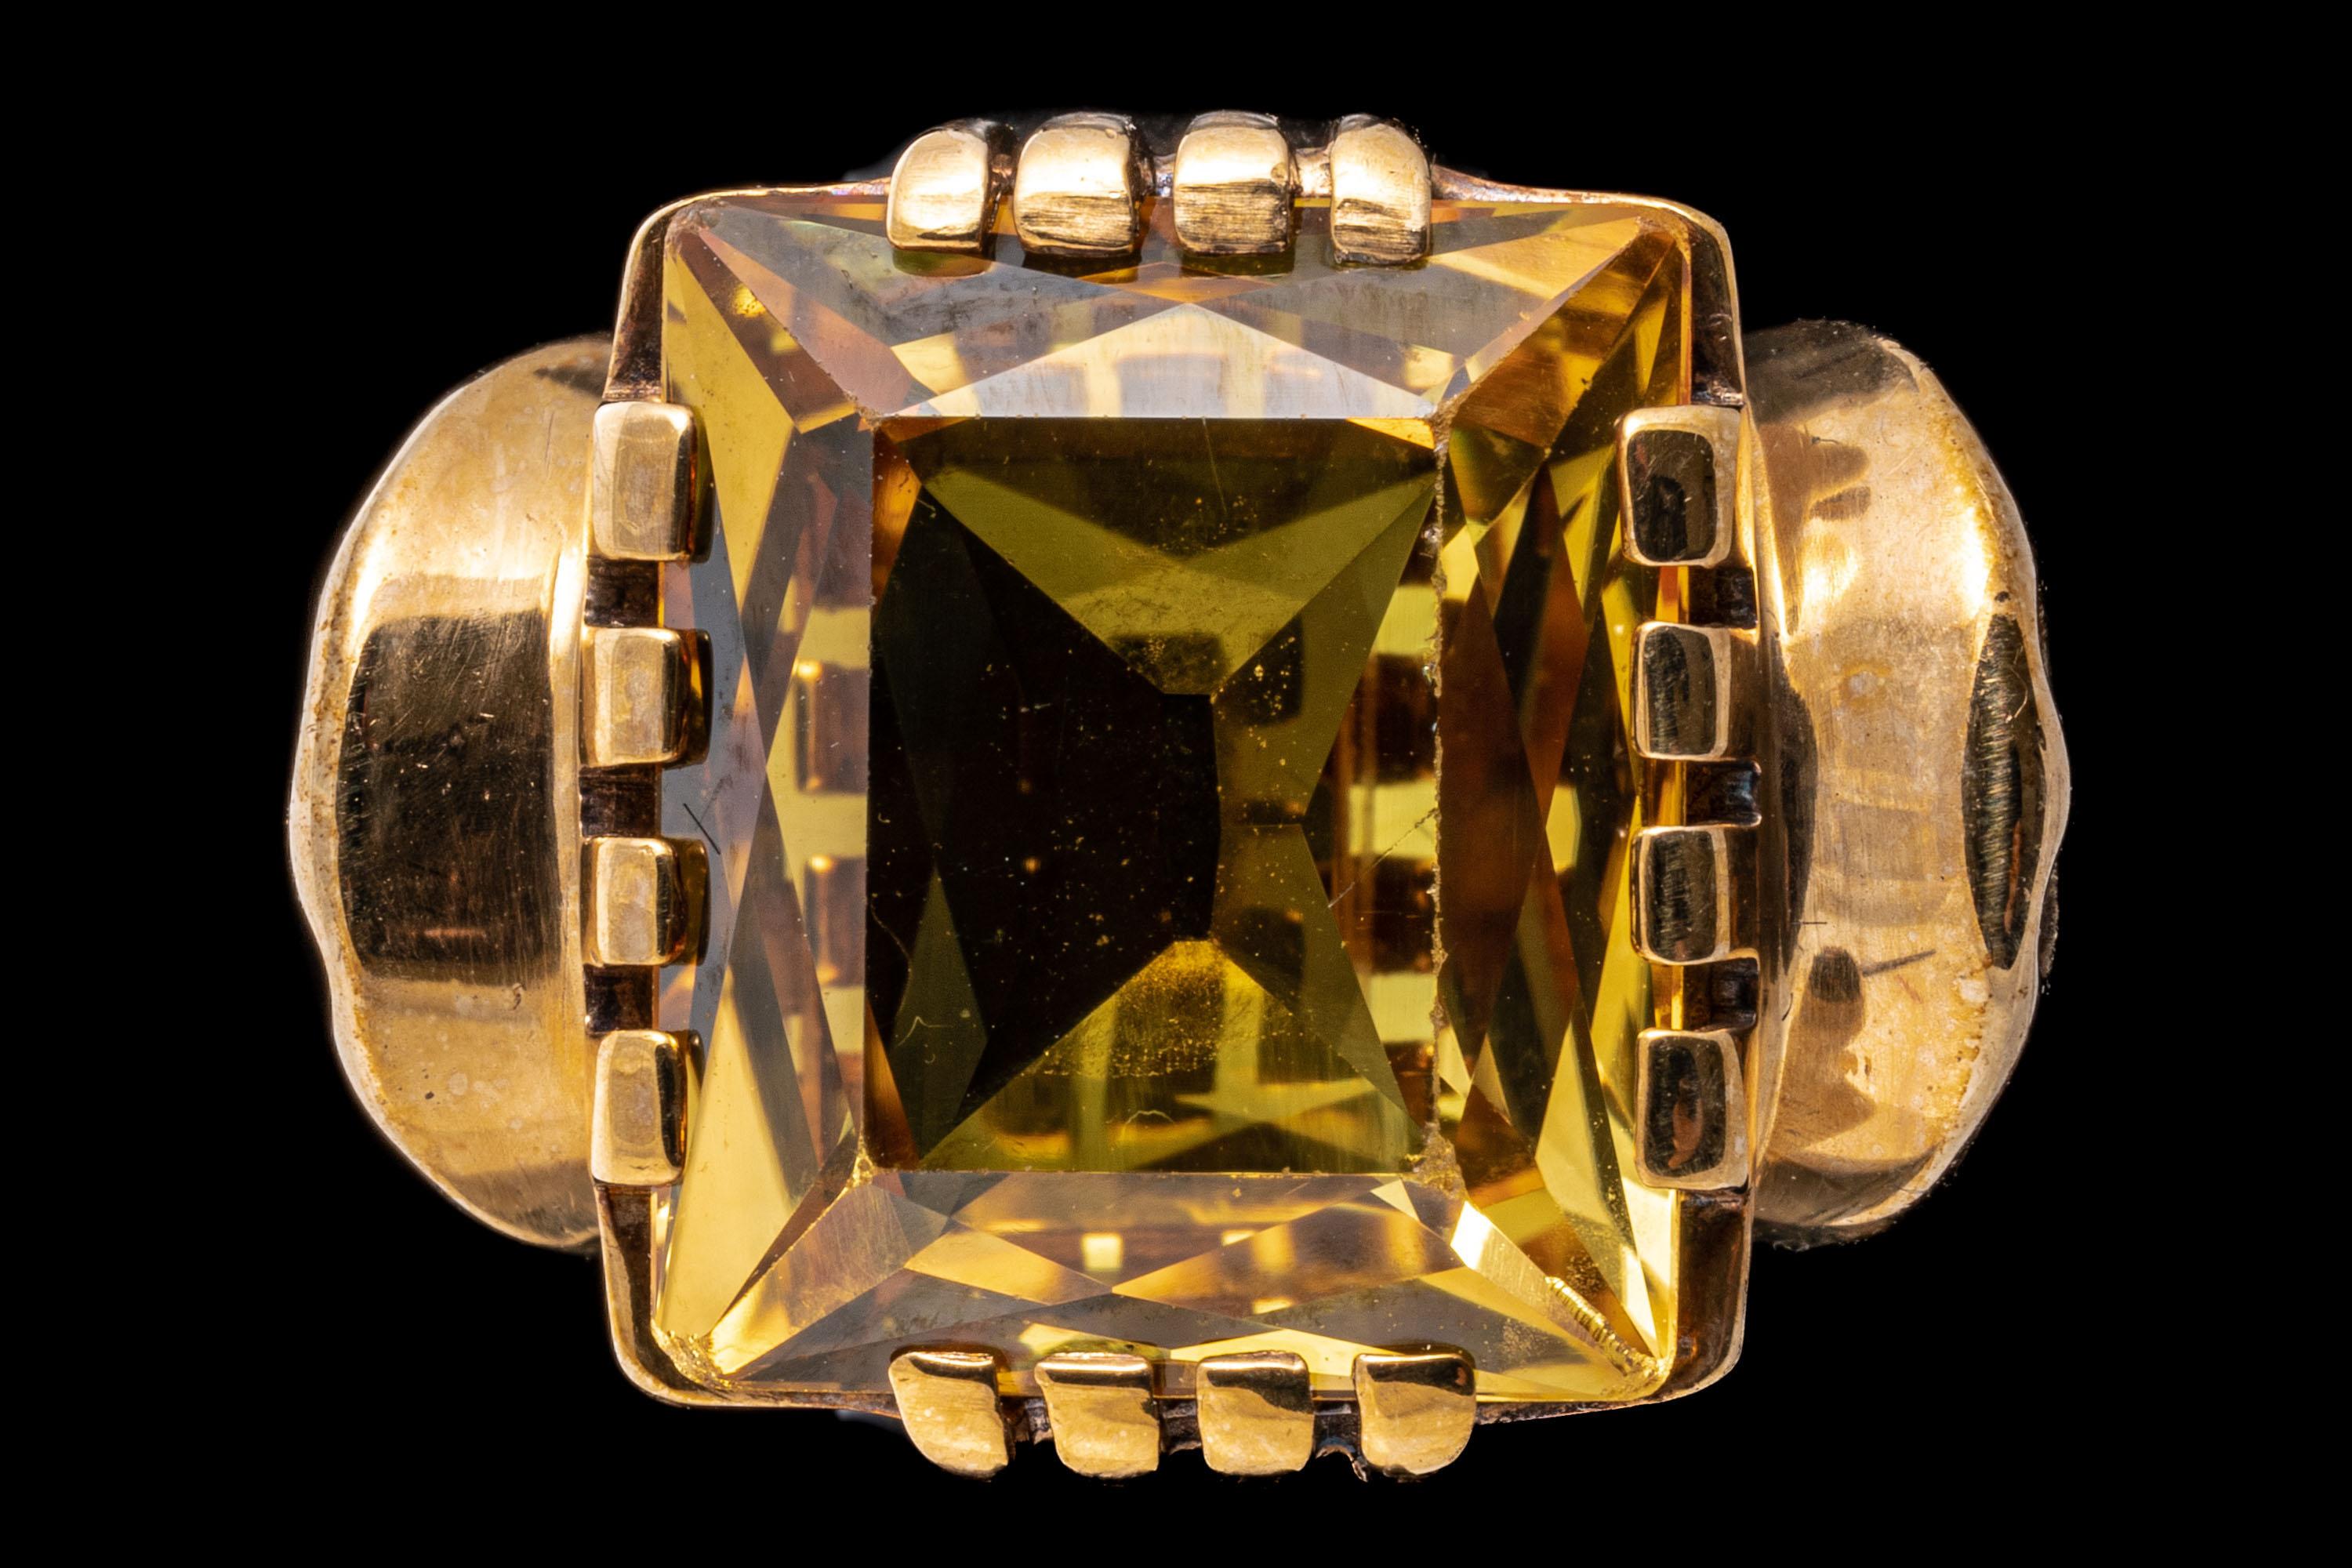 10k yellow gold ring. This handsome vintage ring is a 1950's style, with a square faceted, medium yellow color synthetic sapphire center, set in a notched style mounting with pierced fan motif shoulders.
Marks: None, tests 10k
Dimensions: 3/4